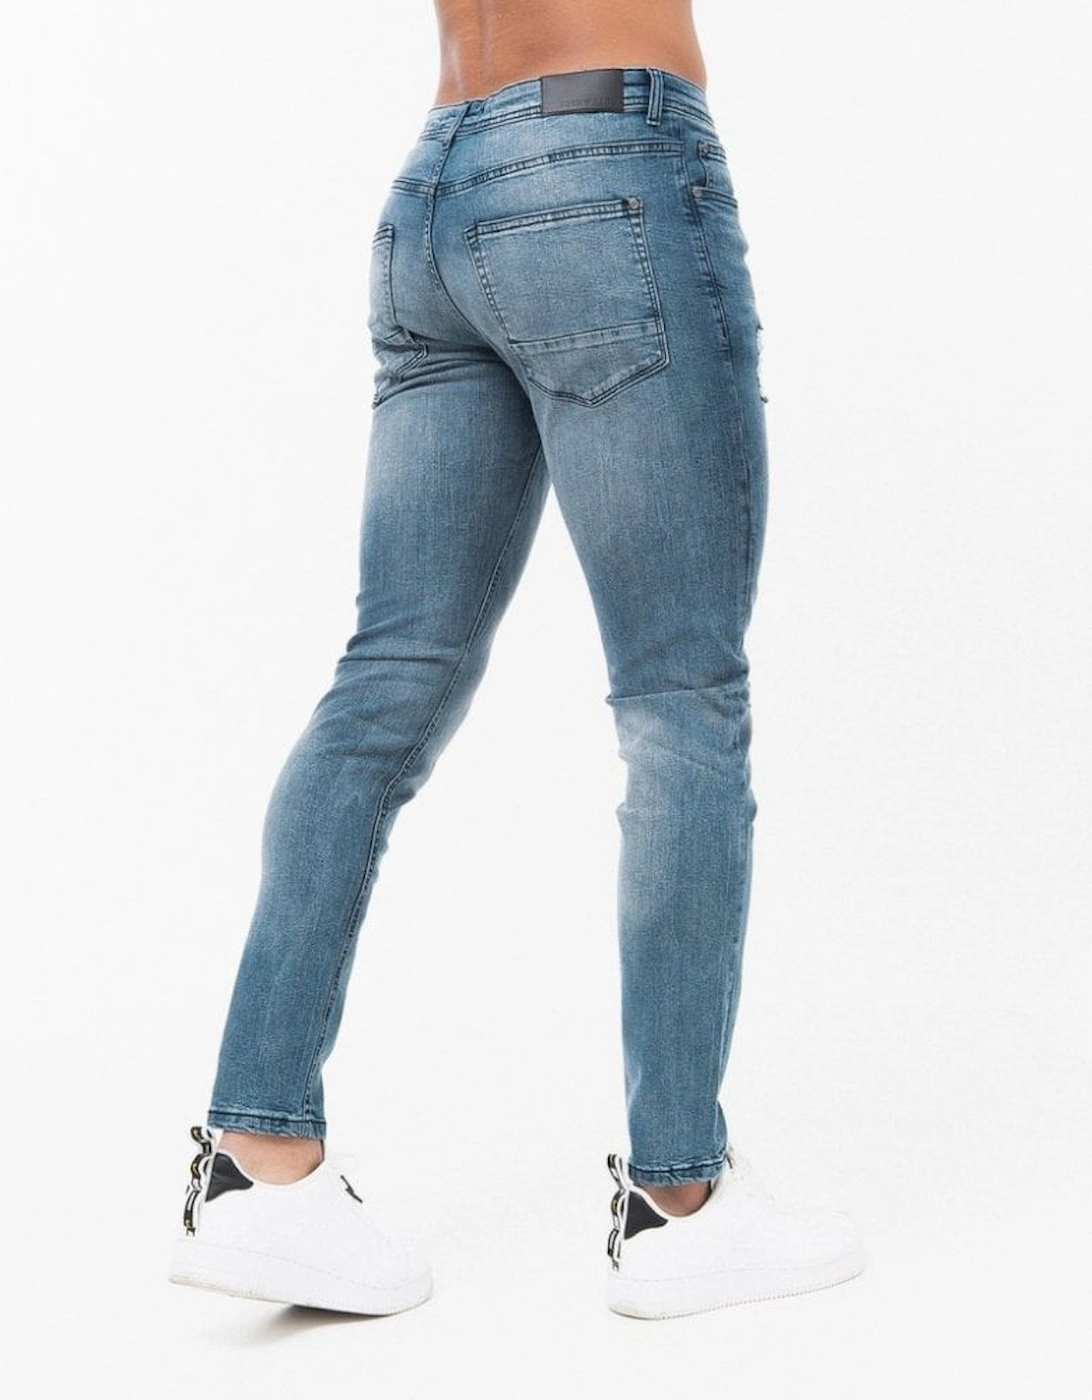 Blue Ripped Slim Fit Jeans